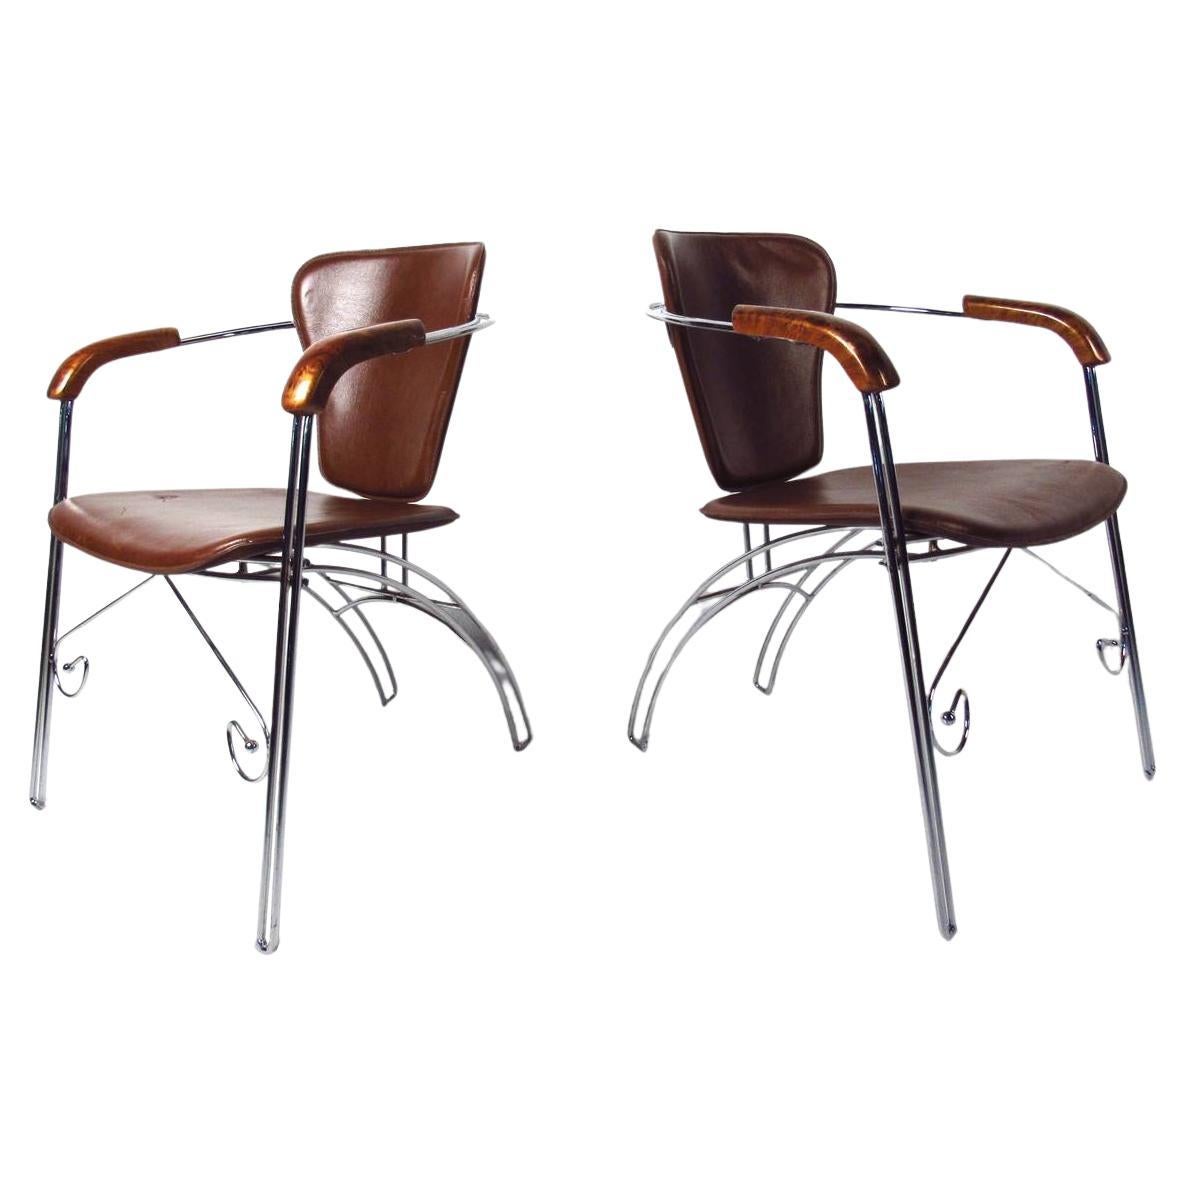 Vintage Modern Leather and Chrome Chairs For Sale